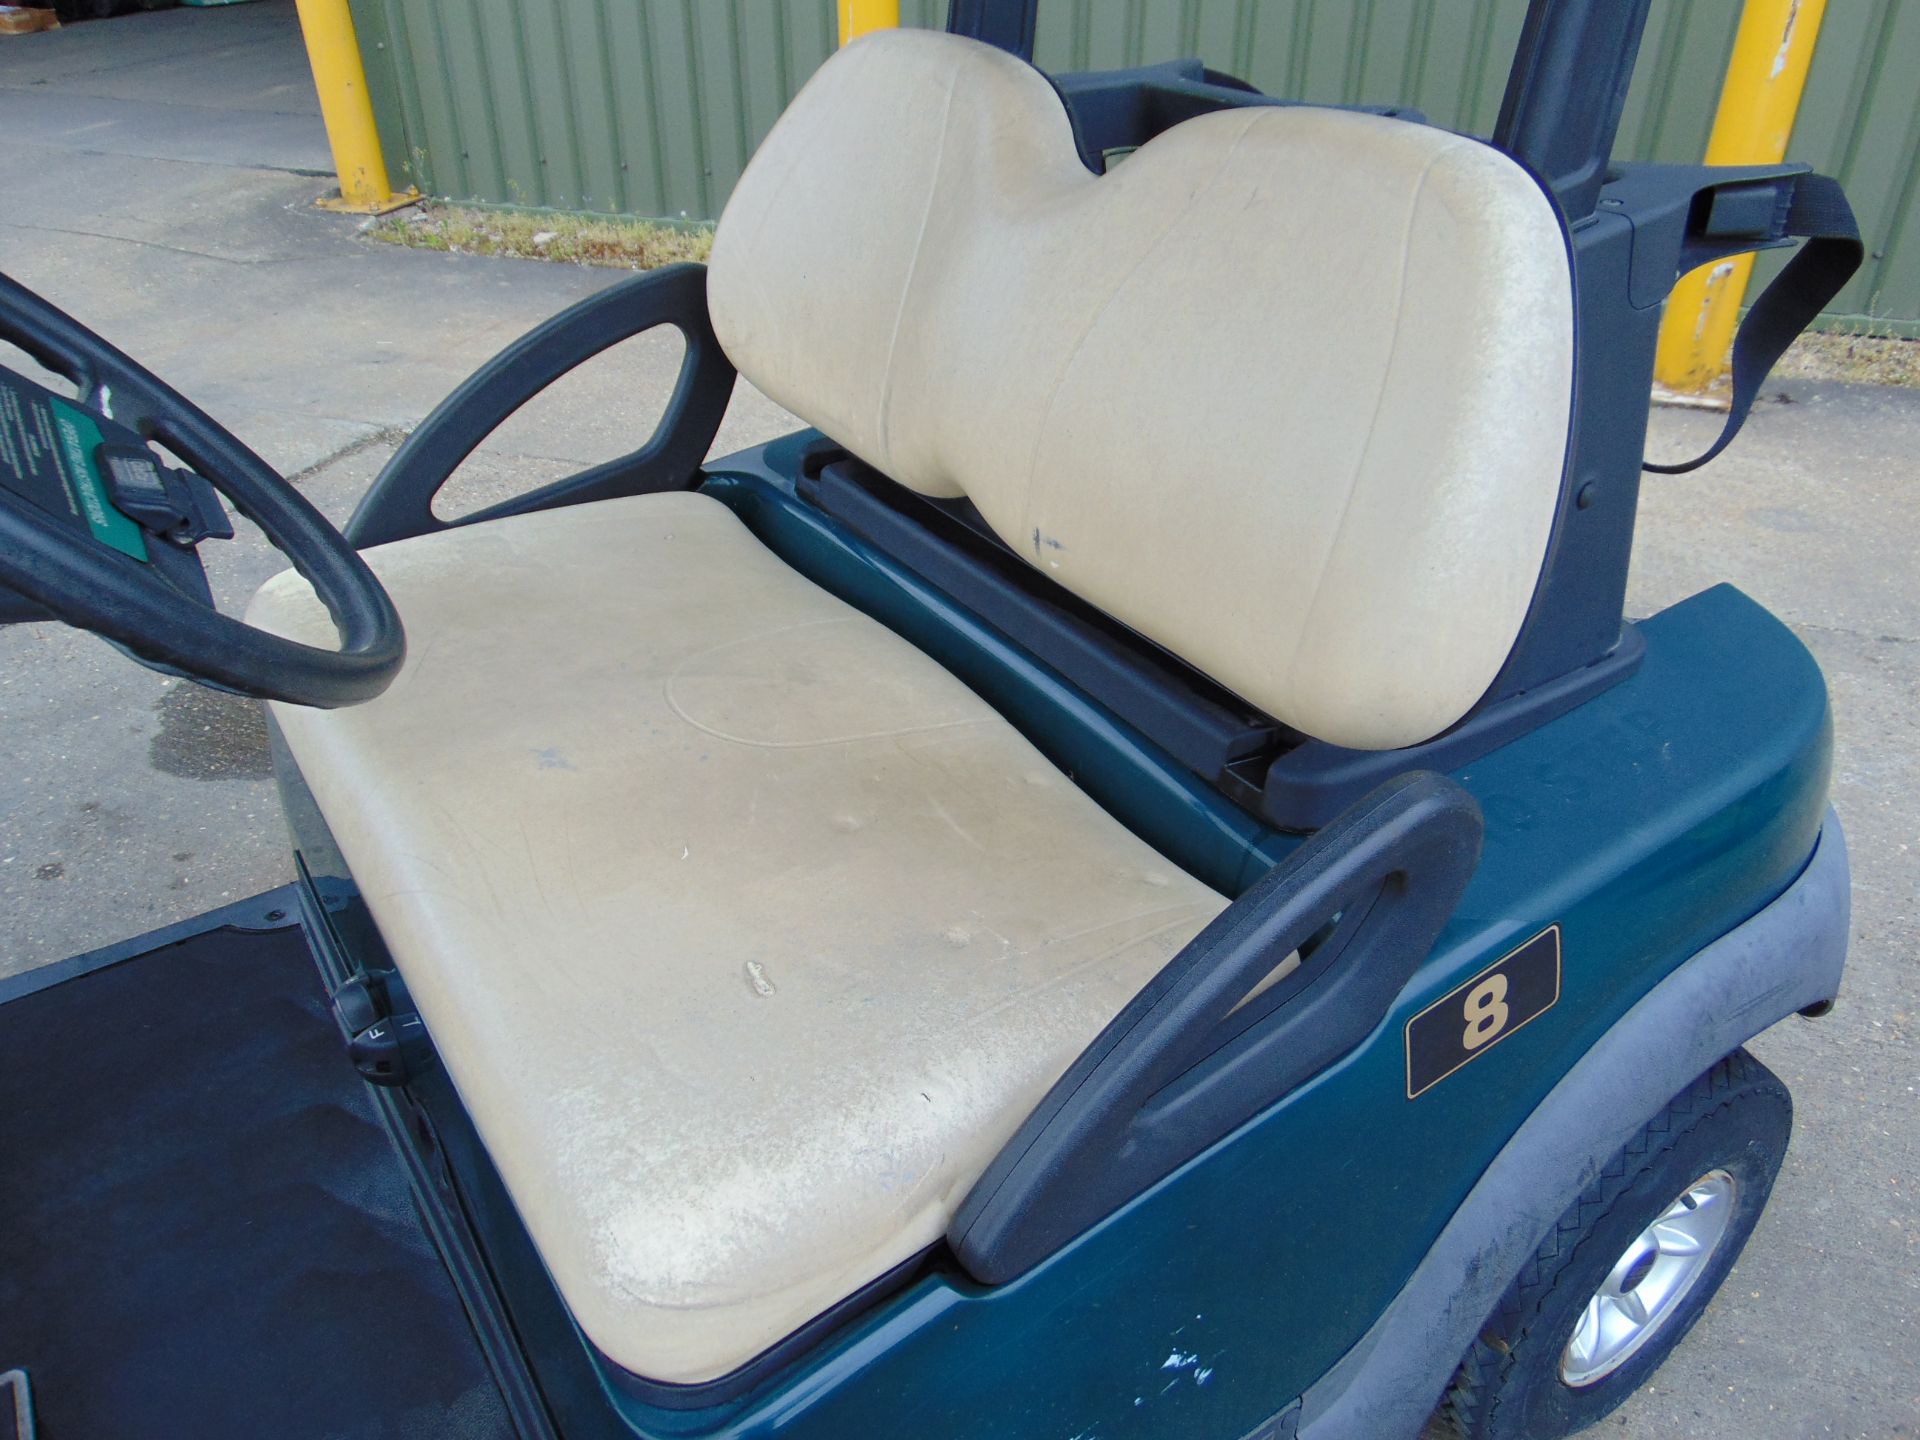 Club Car 2 Seat Electric Golf Buggy C/W Battery Charger - Image 9 of 13